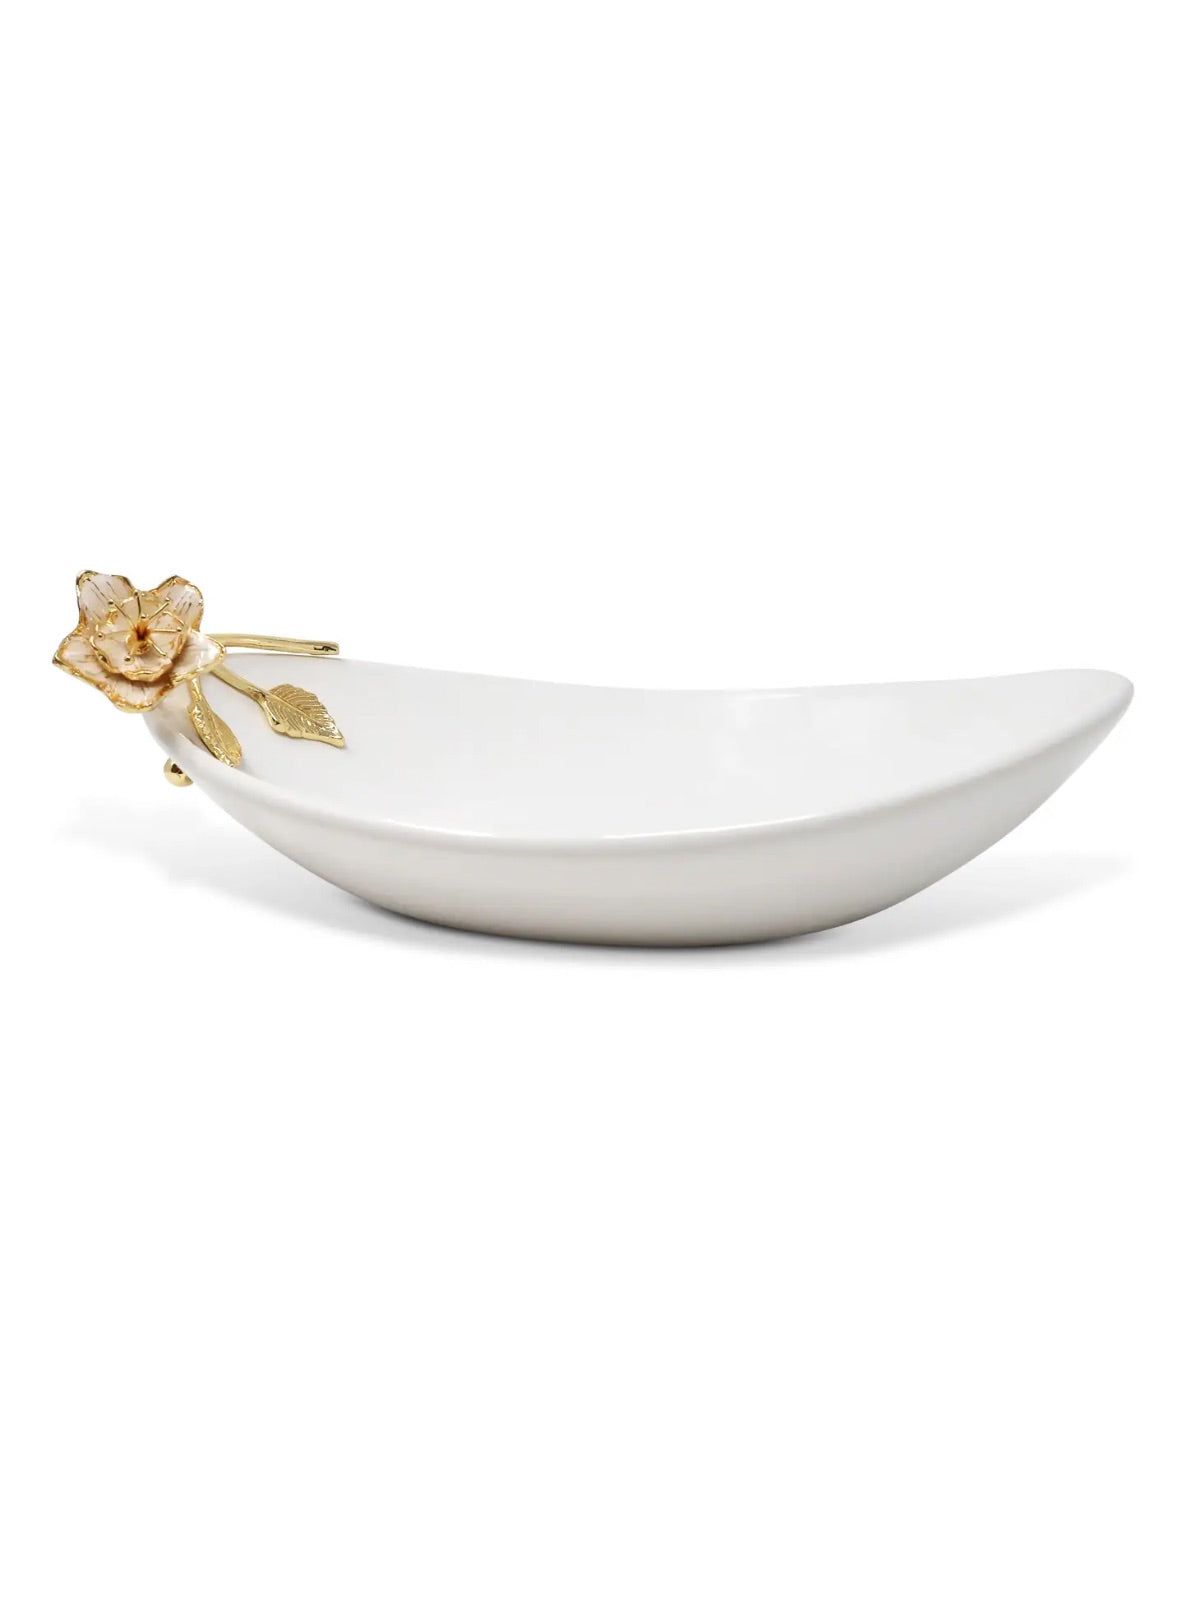 White Porcelain Oval Bowl with Sophisticated Gold Flower Detail.